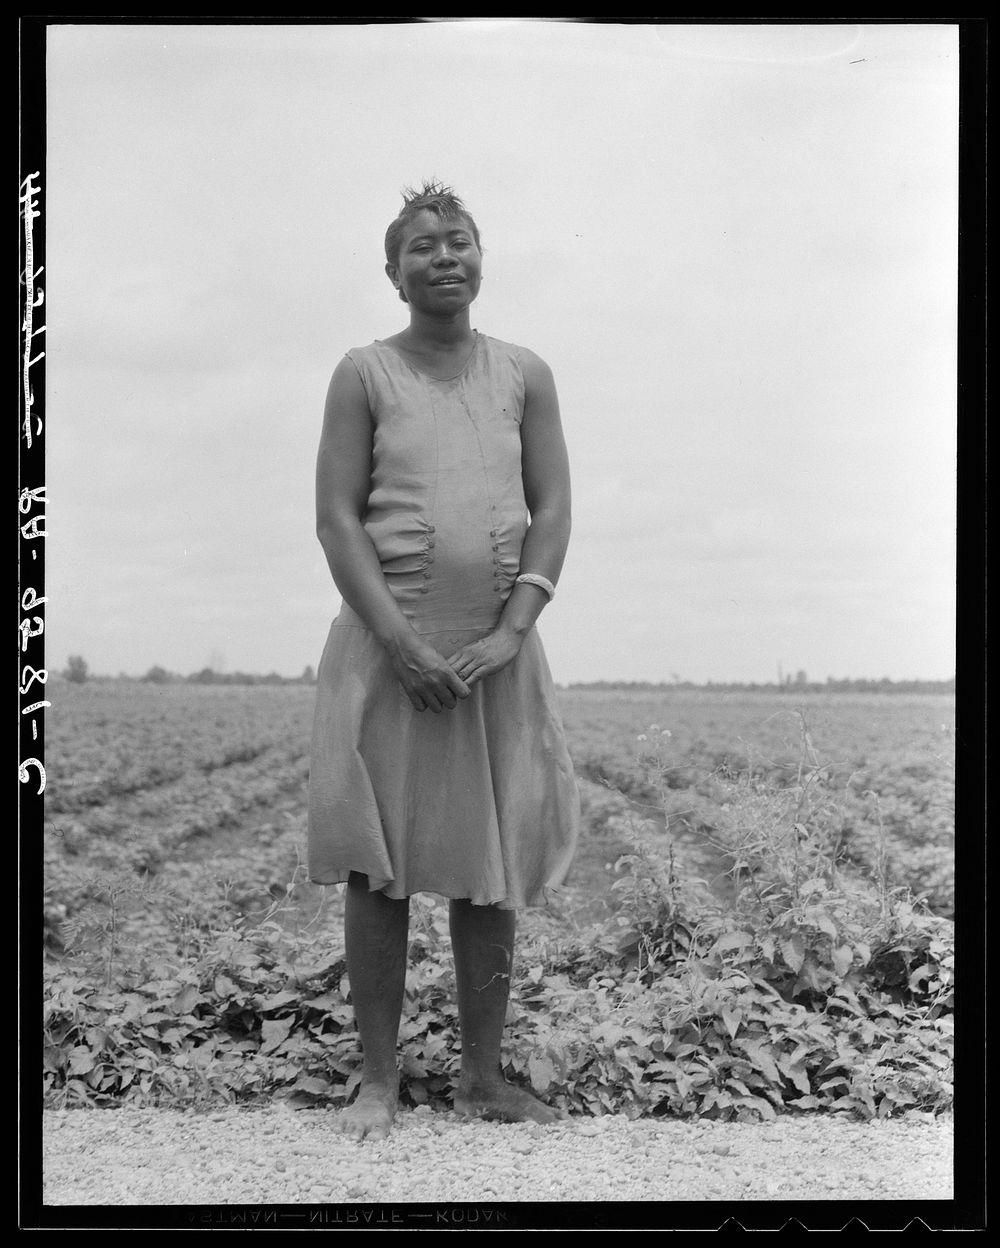  woman who has never been out of Mississippi. Sourced from the Library of Congress.